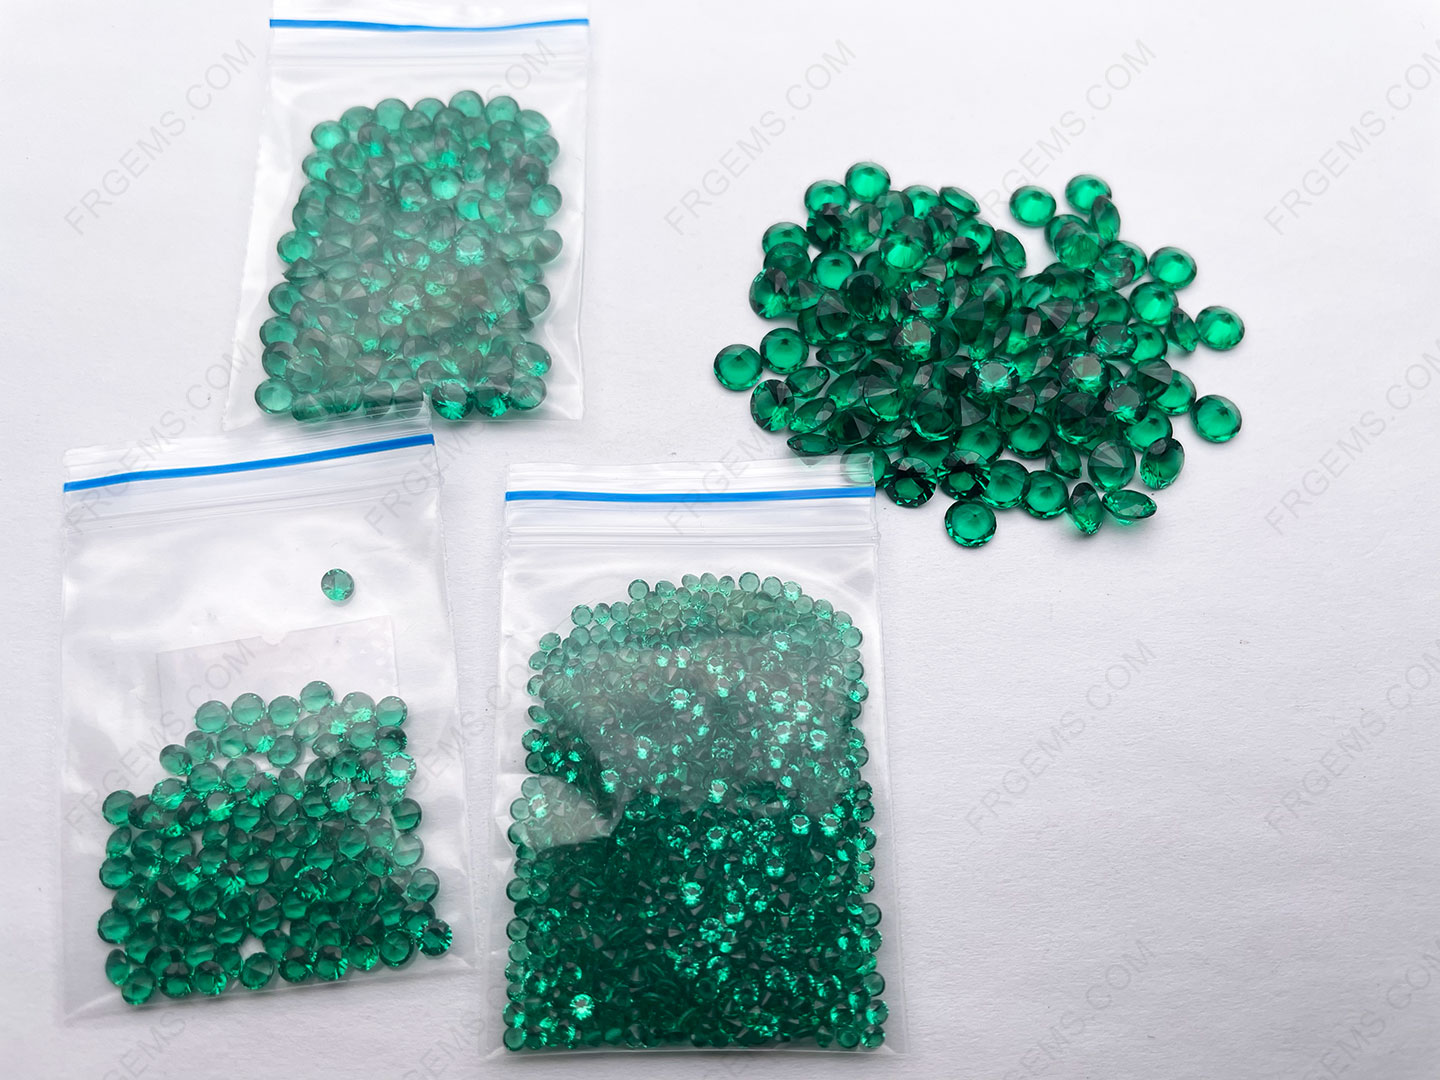 Bulk wholesale Nano Crystal Emerald Green Dark 111# color Round faceted cut gemstones from China